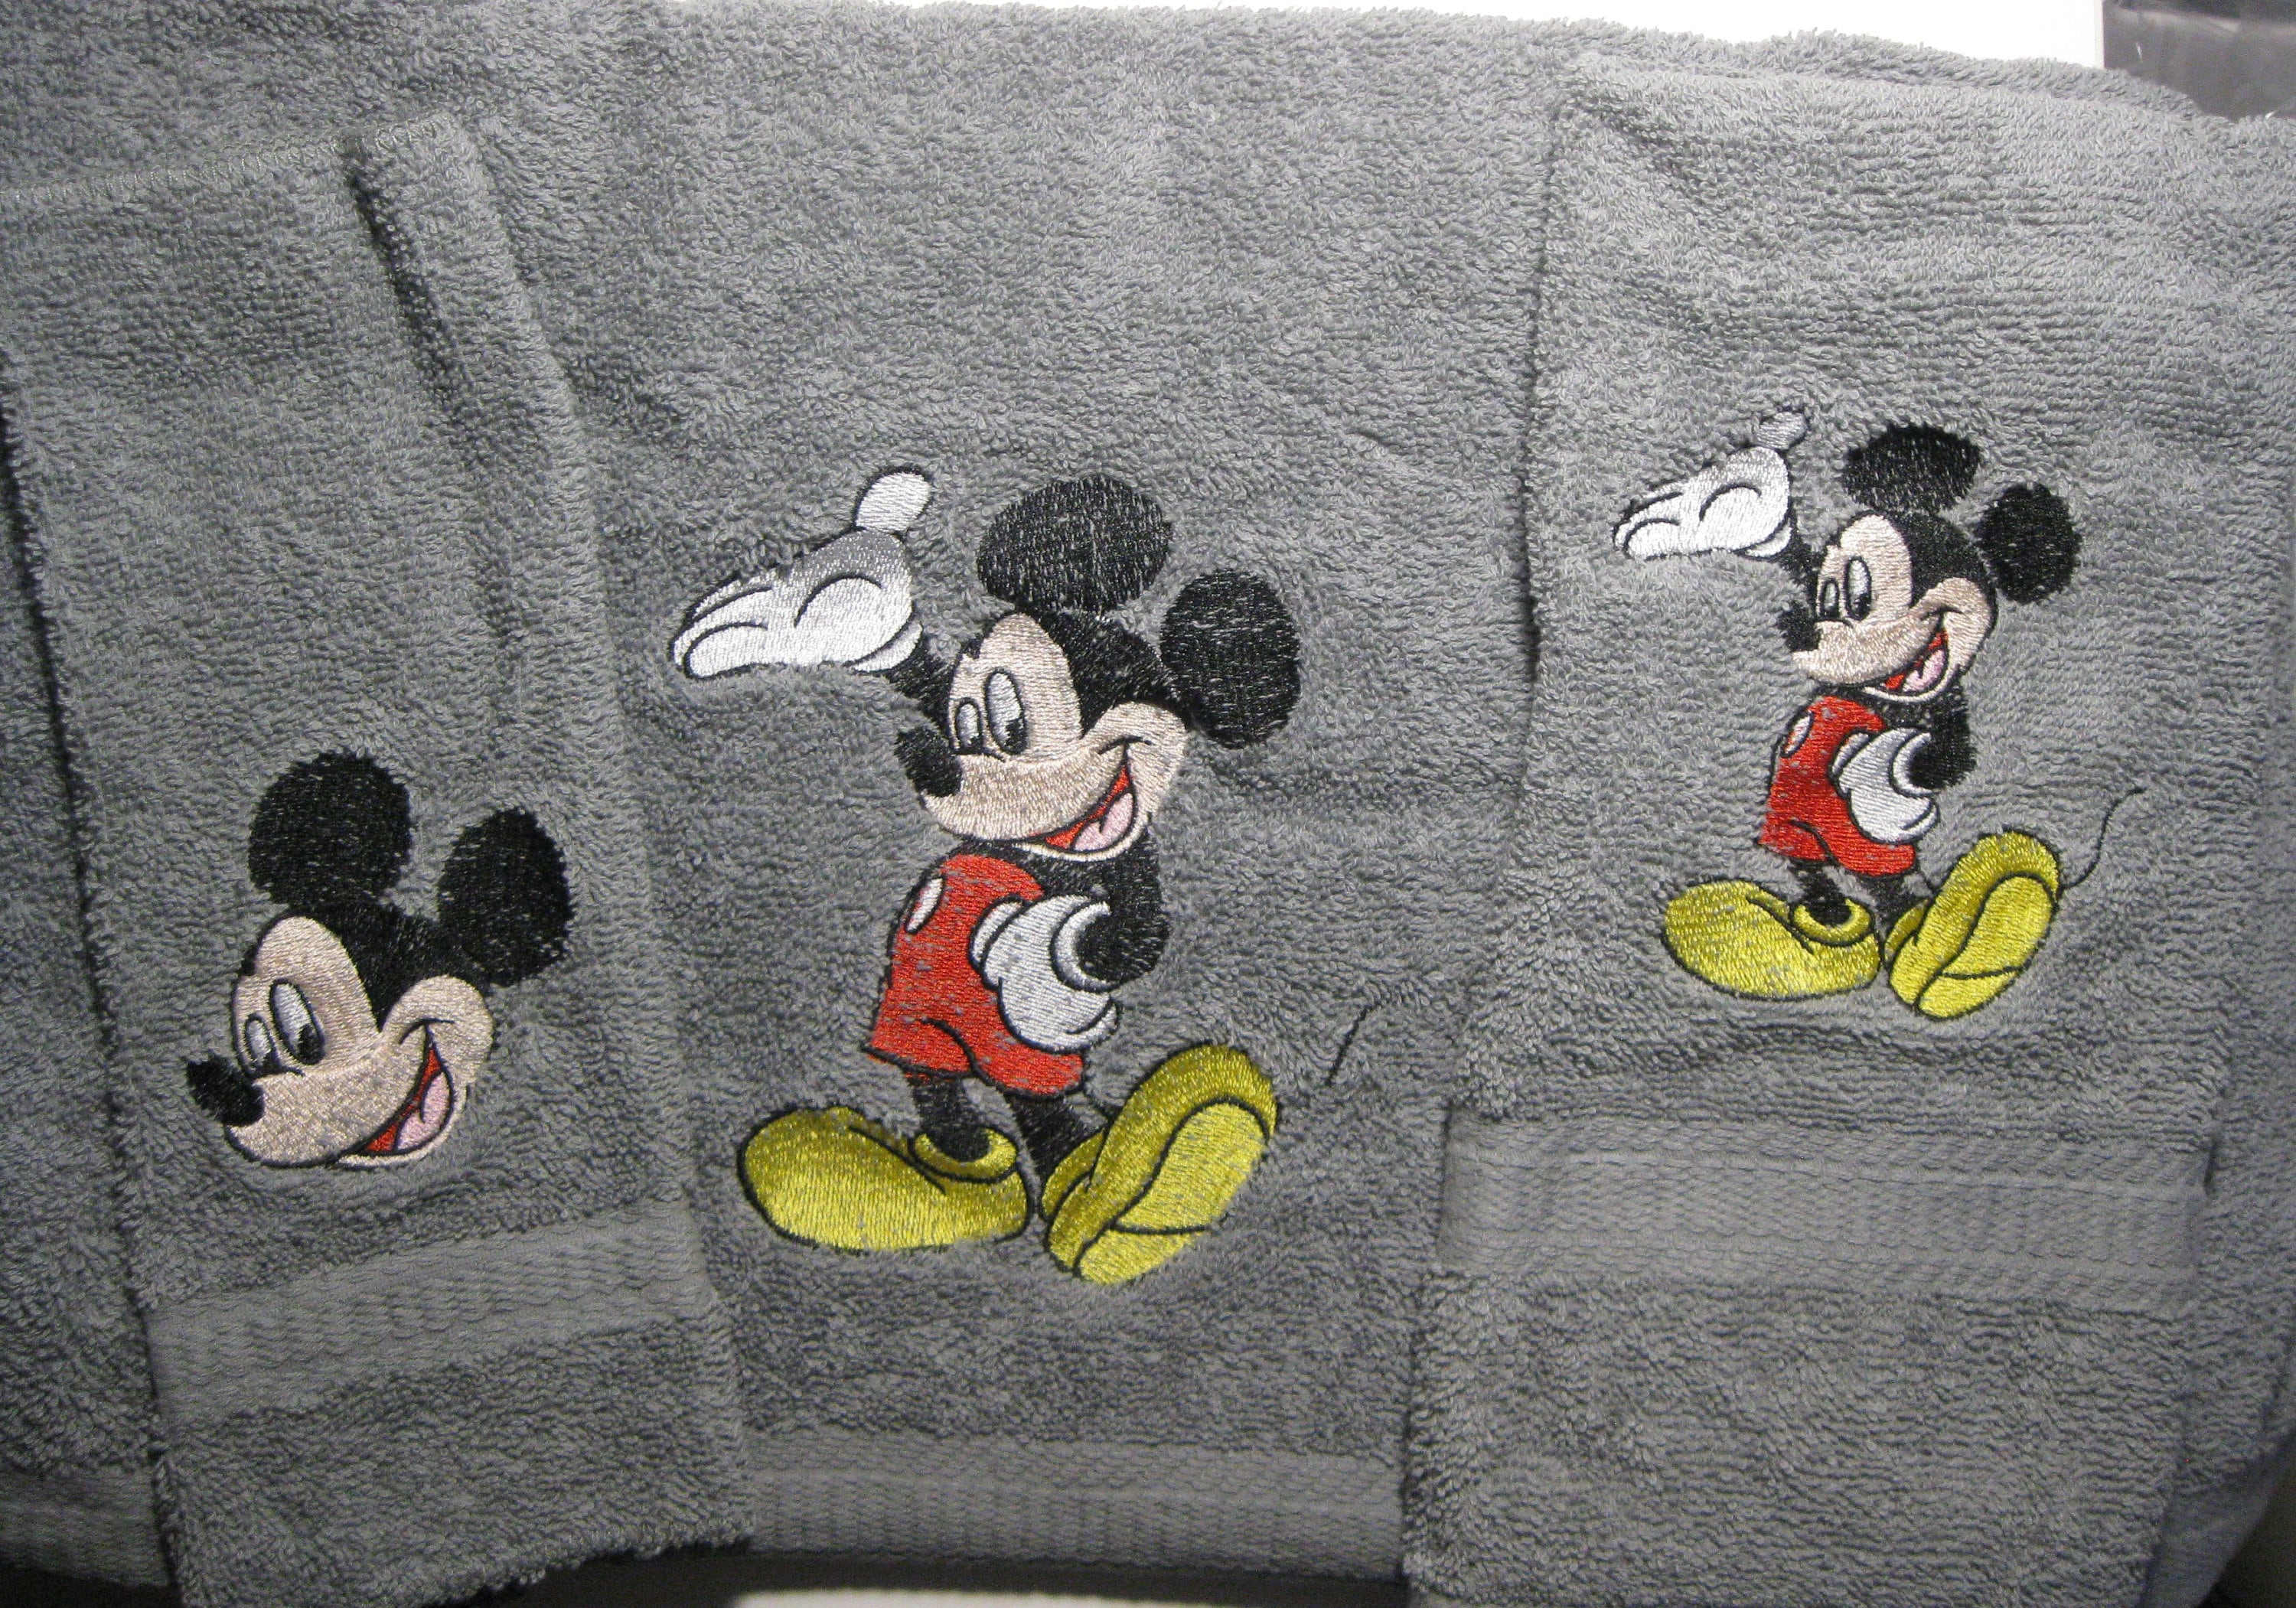 GUCCI feat. DISNEY - cool mickey mouse  Tshirt printing design, Mickey  mouse wallpaper, Tshirt printing business